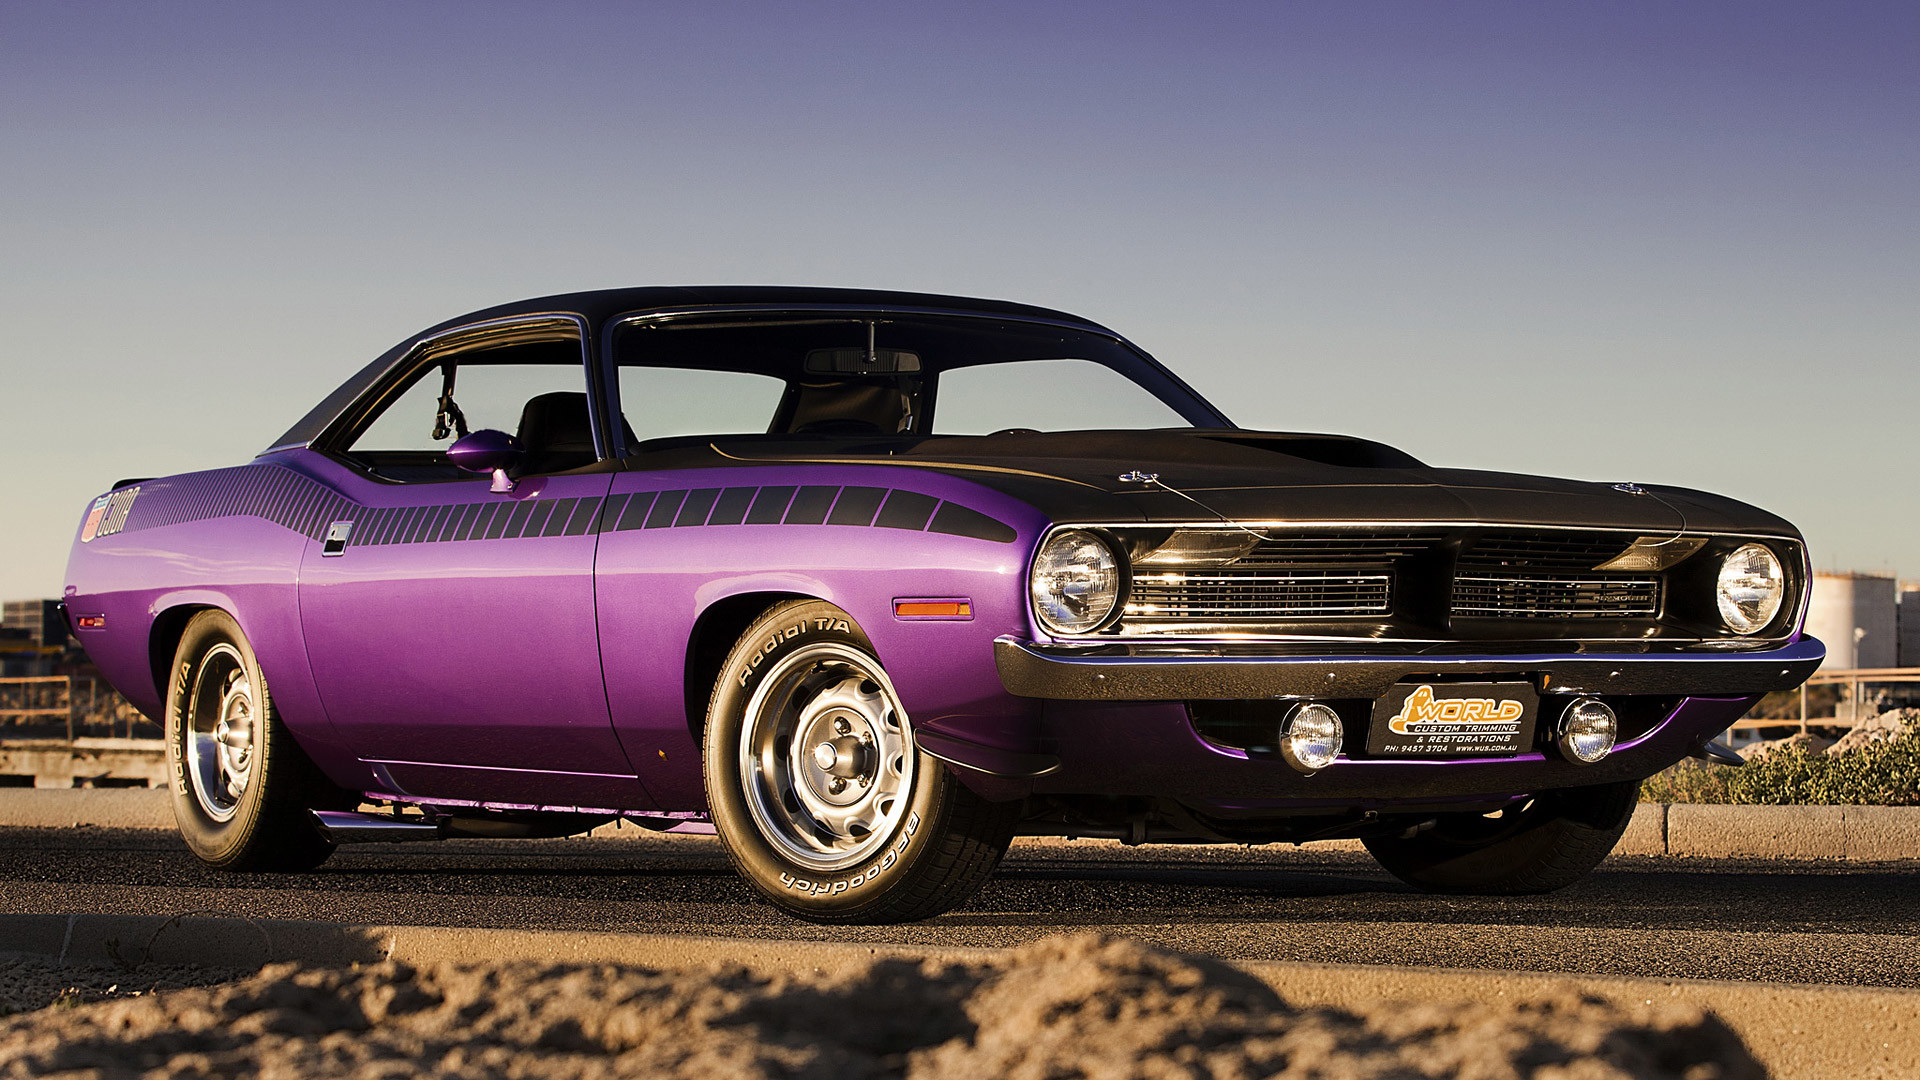 Awesome 1971 Plymouth Barracuda Wallpaper Download